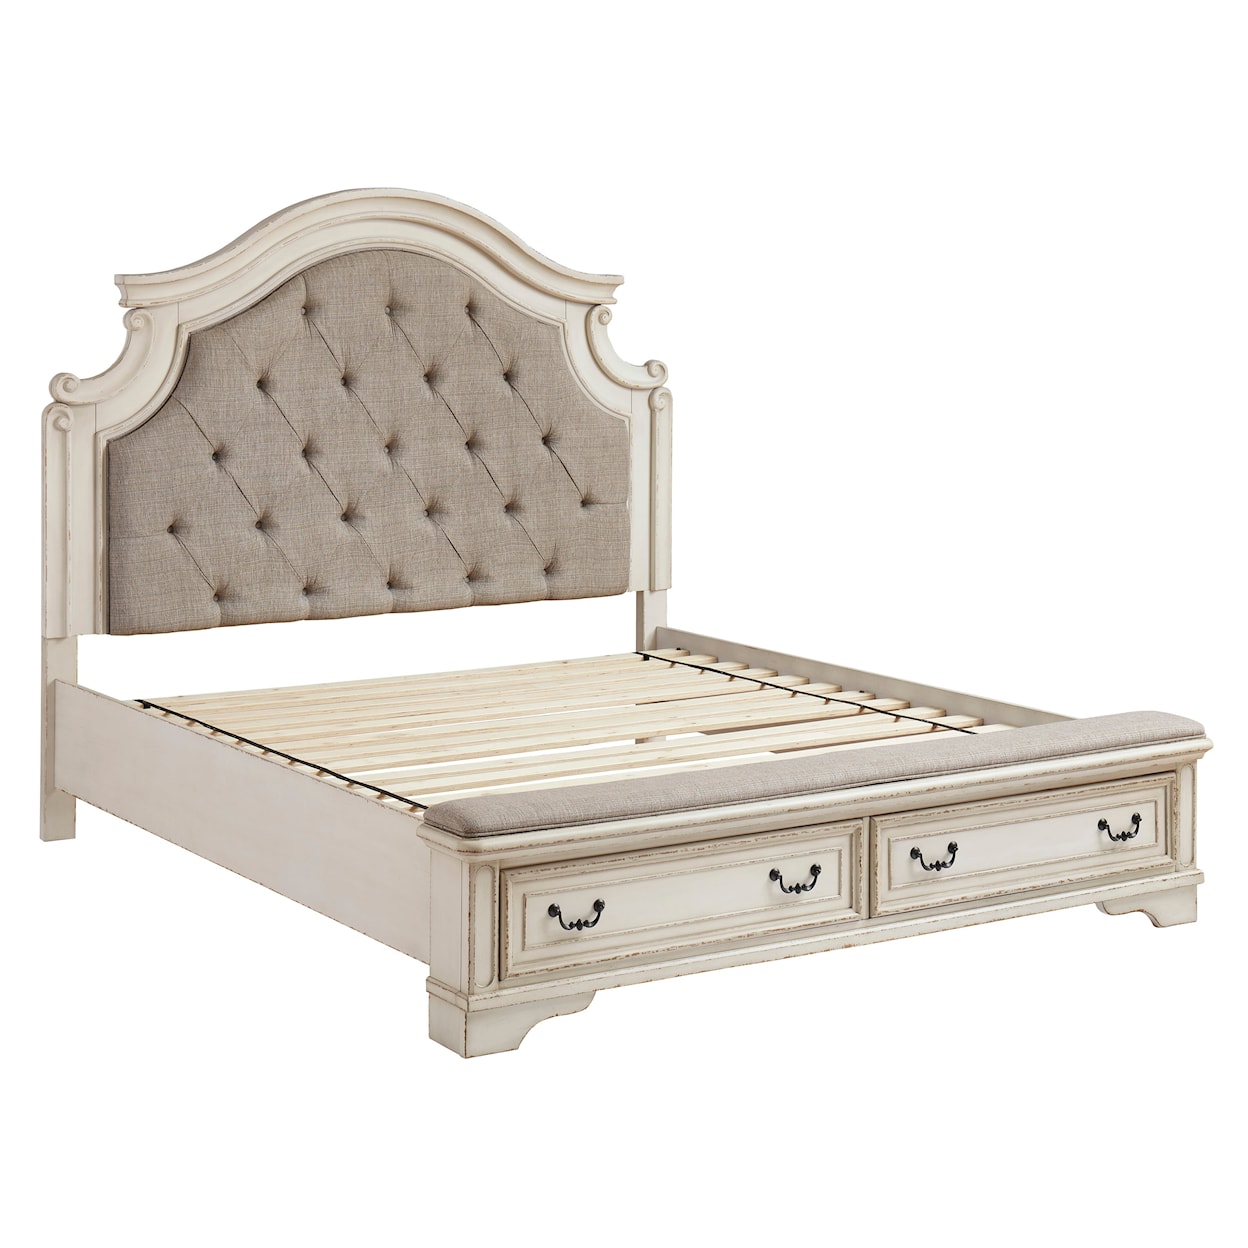 Signature Design by Ashley Realyn Cal King Upholstered Storage Bed